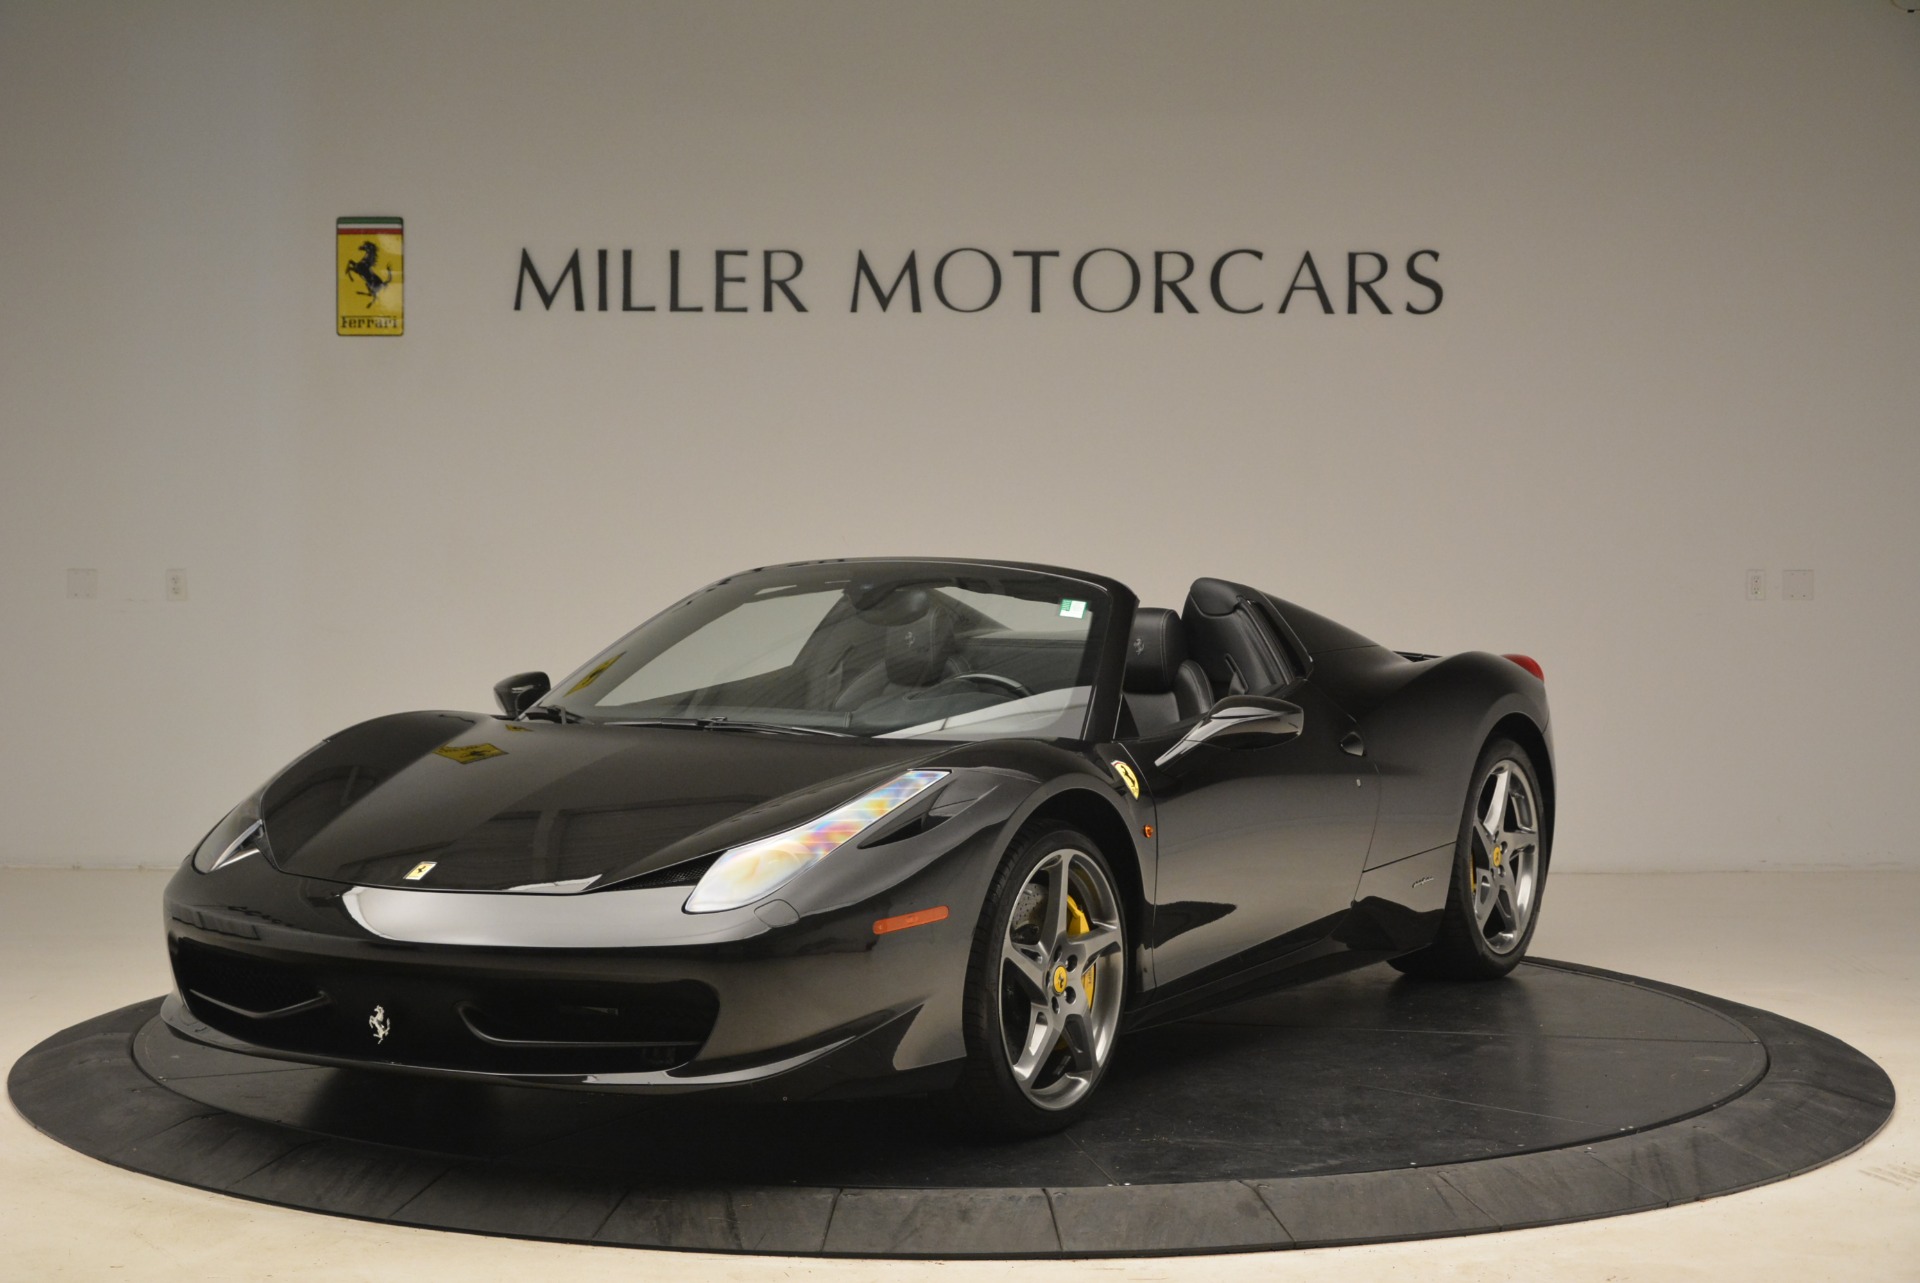 Used 2013 Ferrari 458 Spider for sale Sold at McLaren Greenwich in Greenwich CT 06830 1